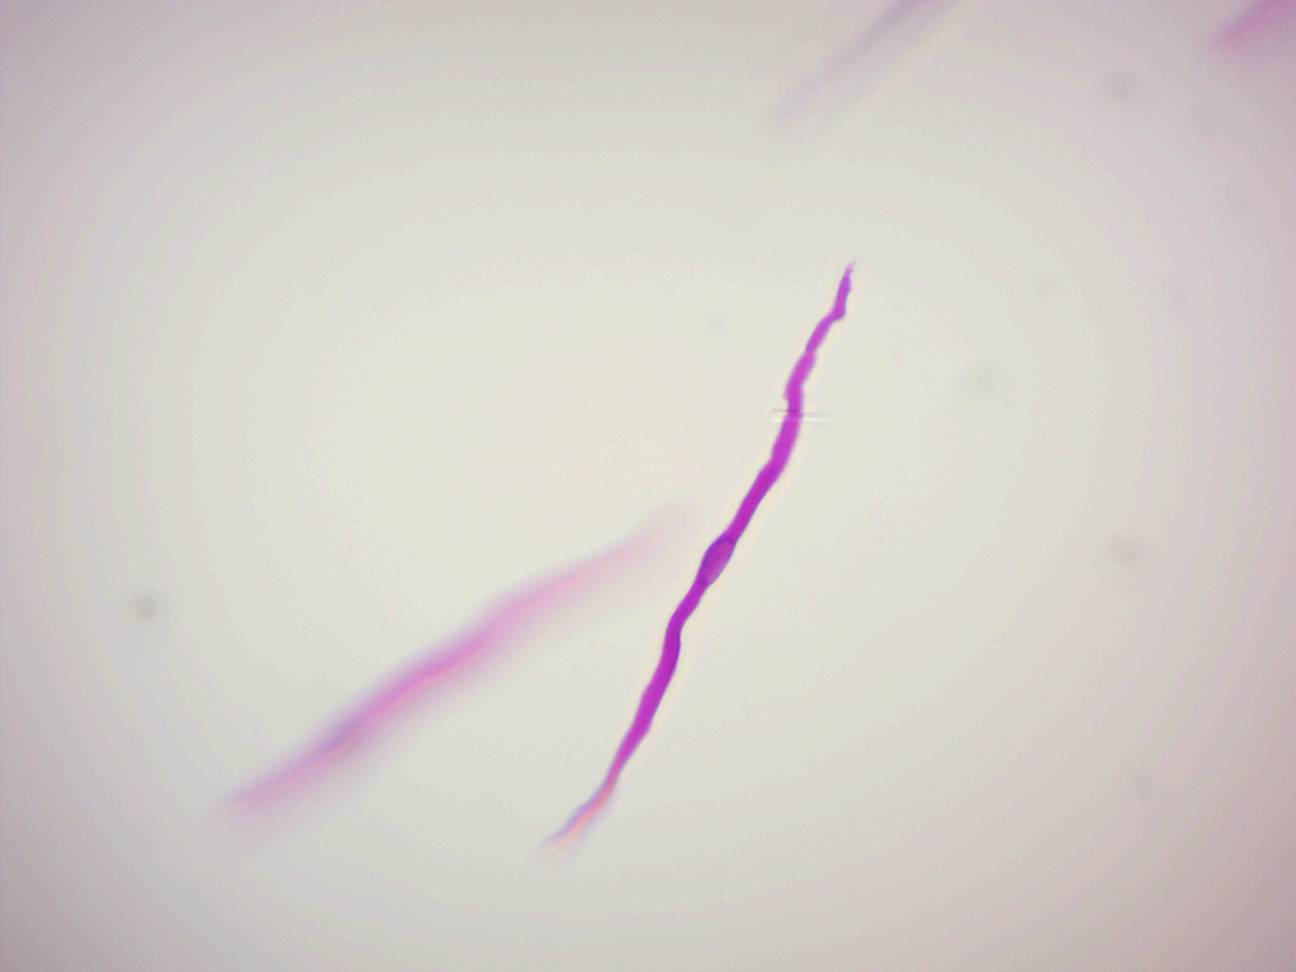 A teased smooth muscle fiber.